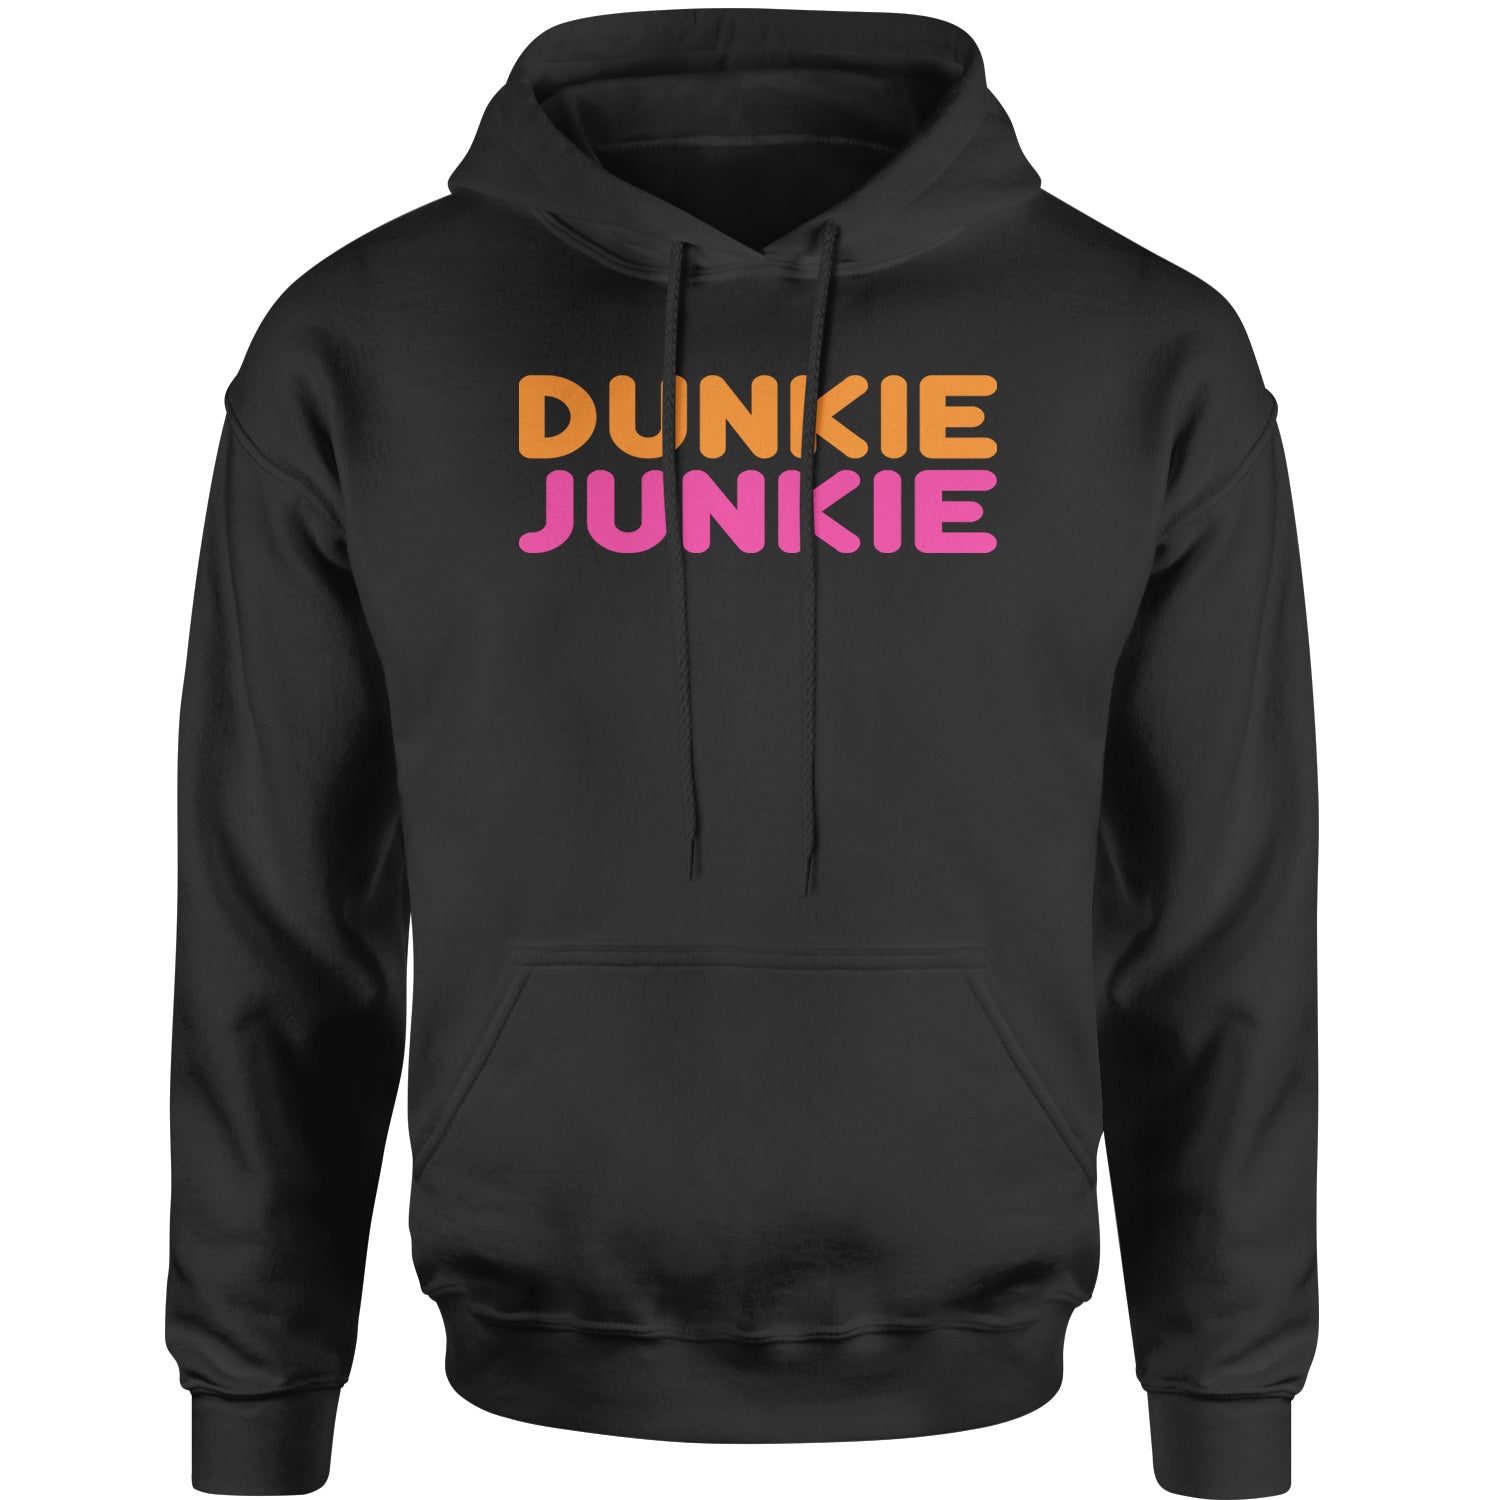 Dunkie Junkie Adult Hoodie Sweatshirt addict, capuccino, coffee, dd, dnkn, dunkin, dunking, latte by Expression Tees